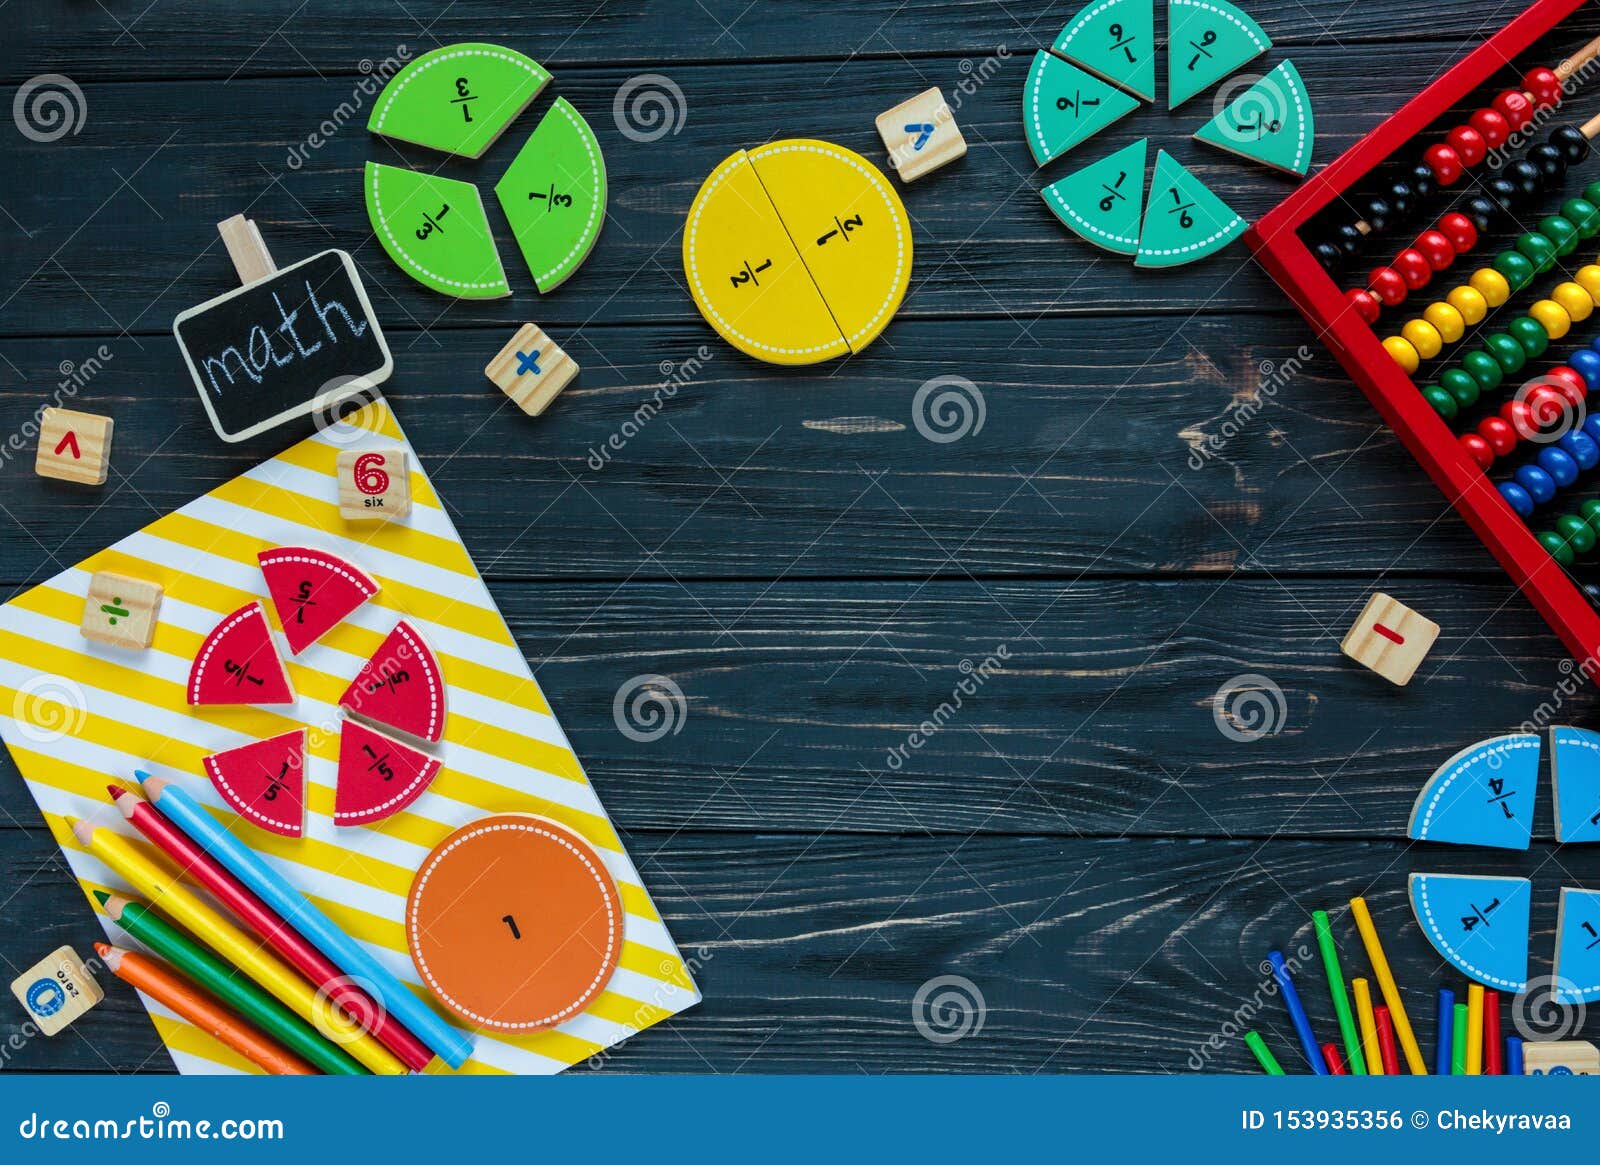 Creative Ð¡olorful Math Fractions on Dark Background. Interesting Funny Math  for Kids Stock Photo - Image of children, equipment: 153935356